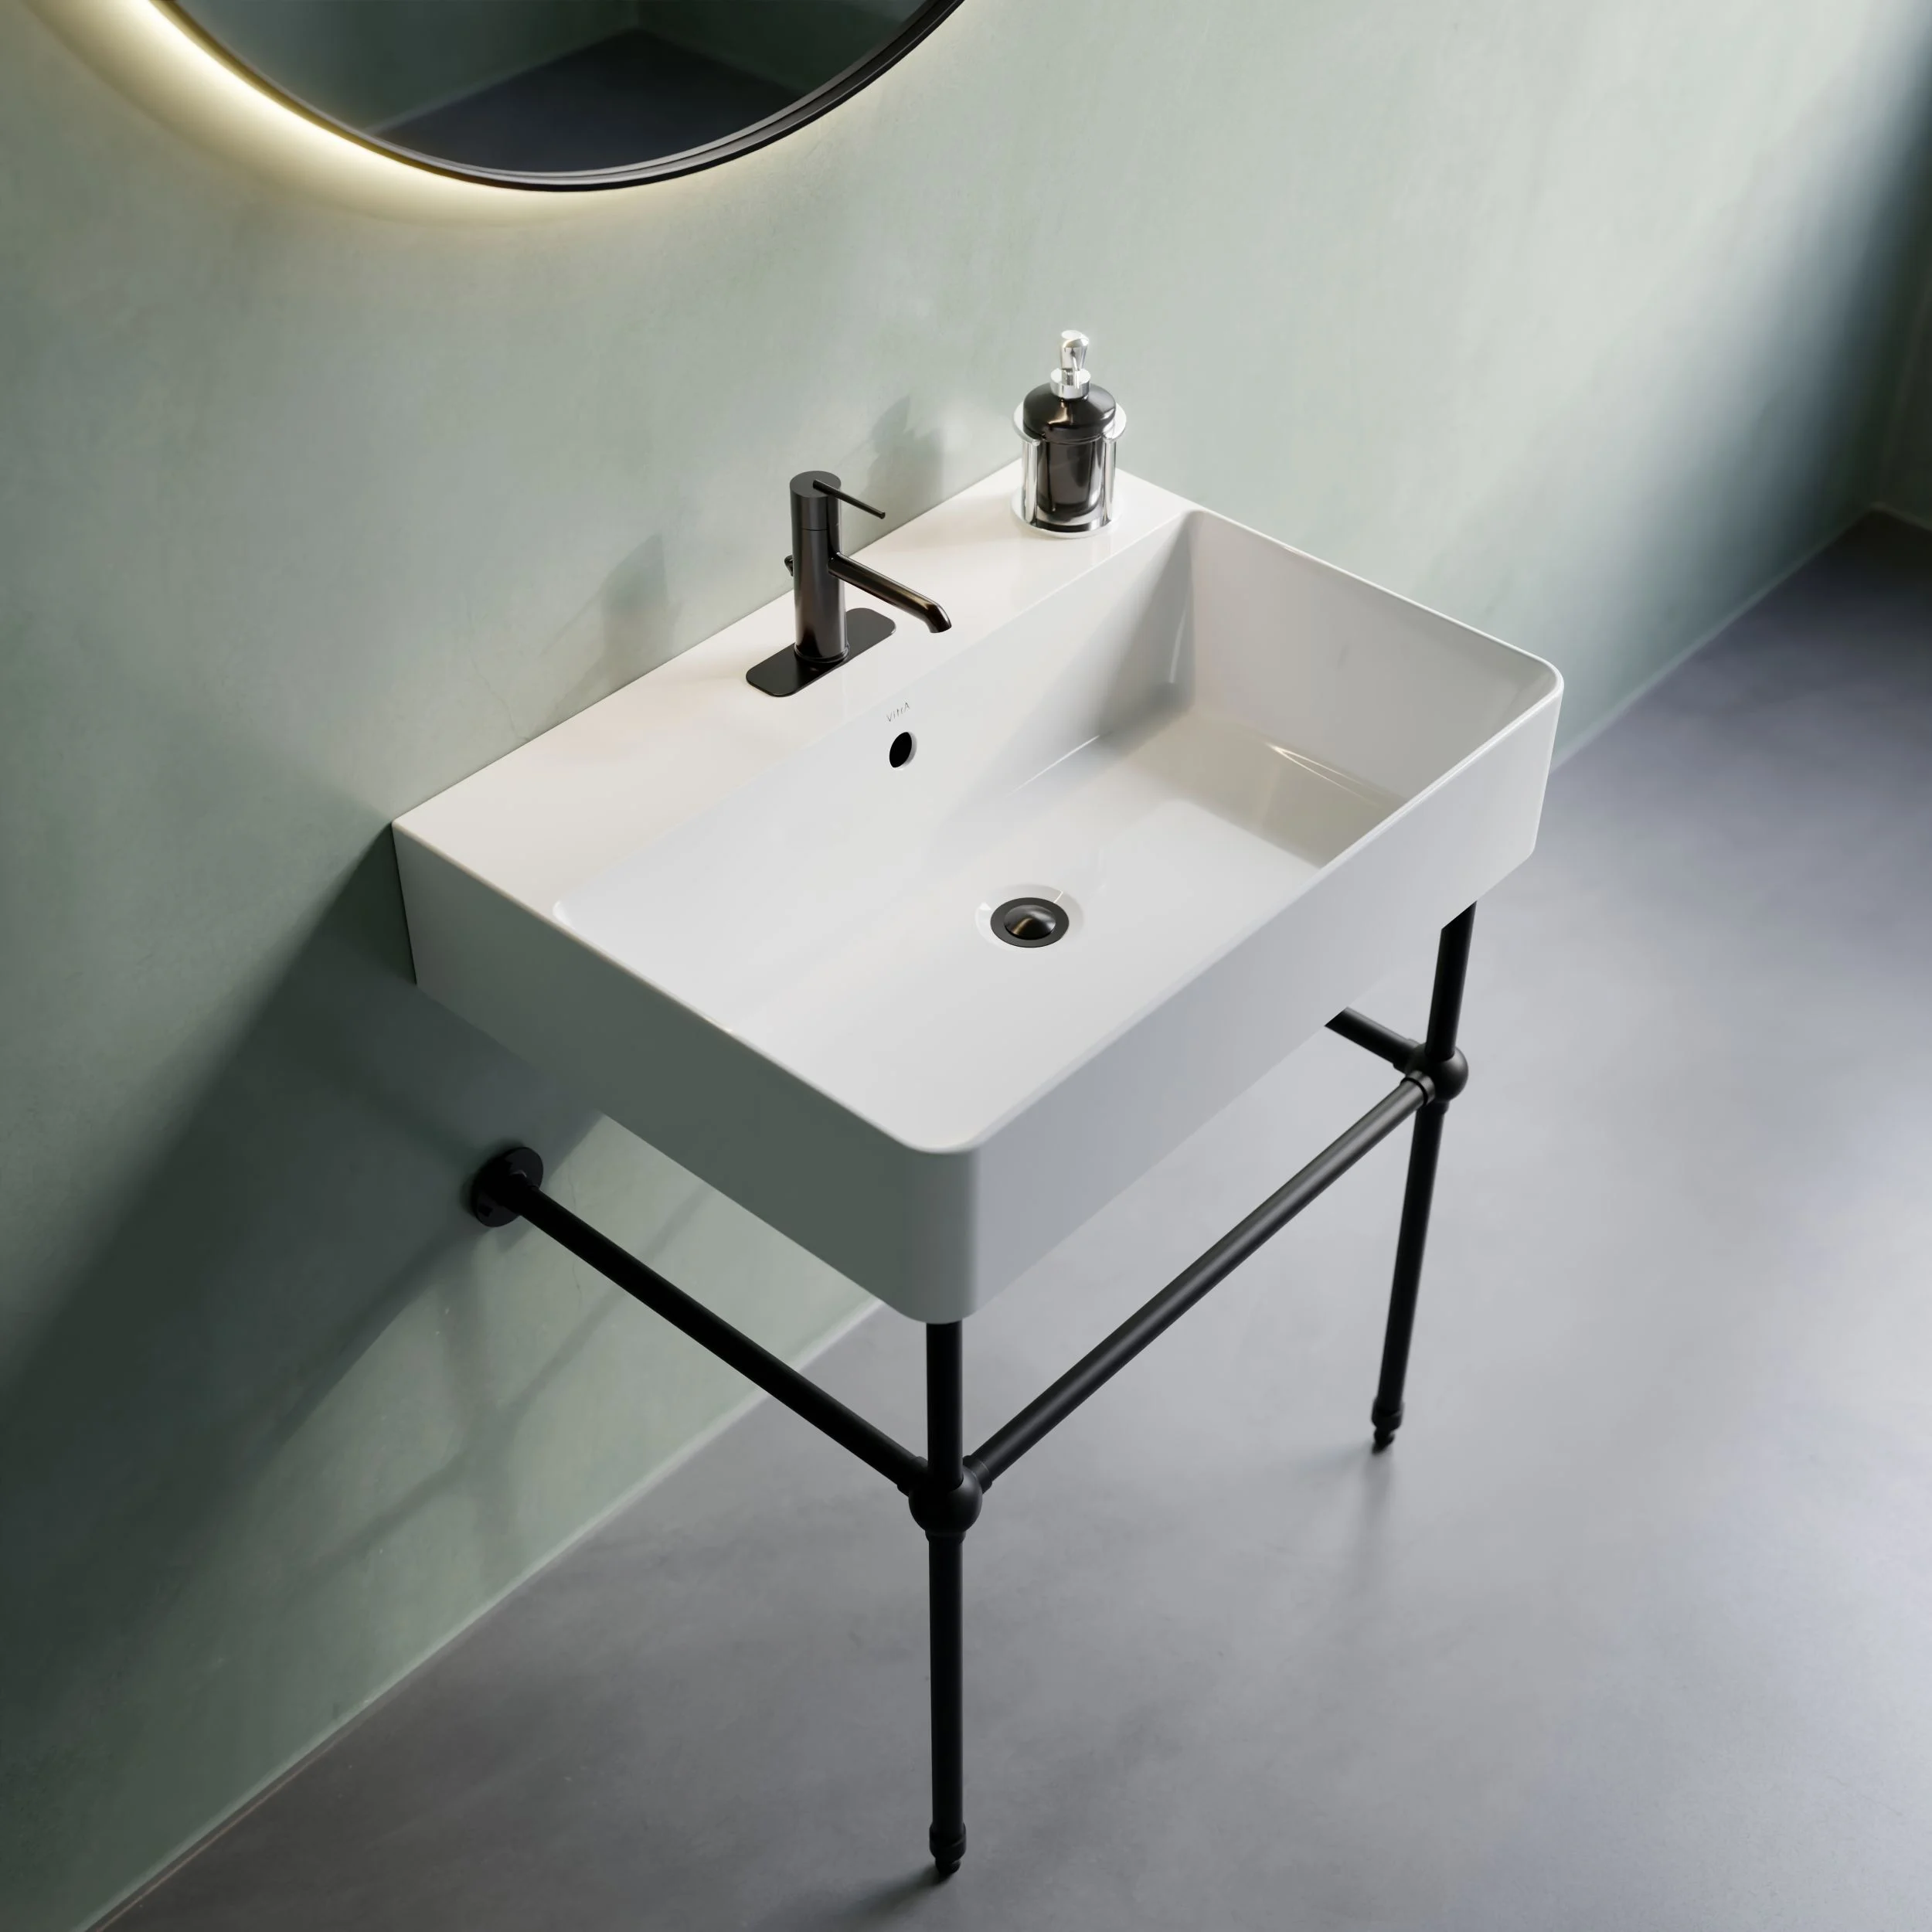 NUO 2 Console Sink